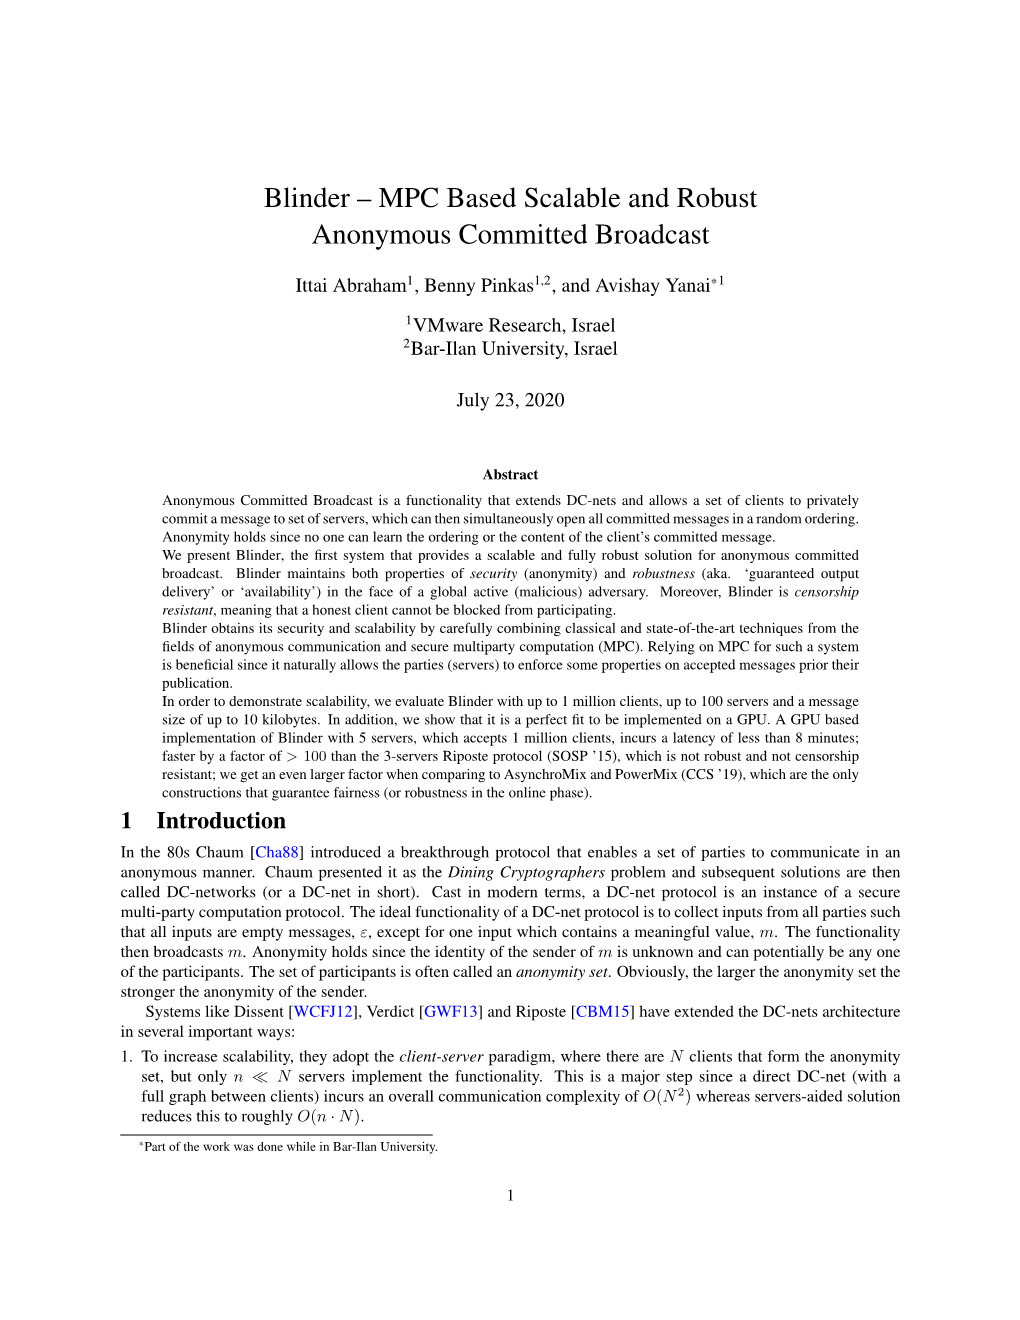 Blinder – MPC Based Scalable and Robust Anonymous Committed Broadcast